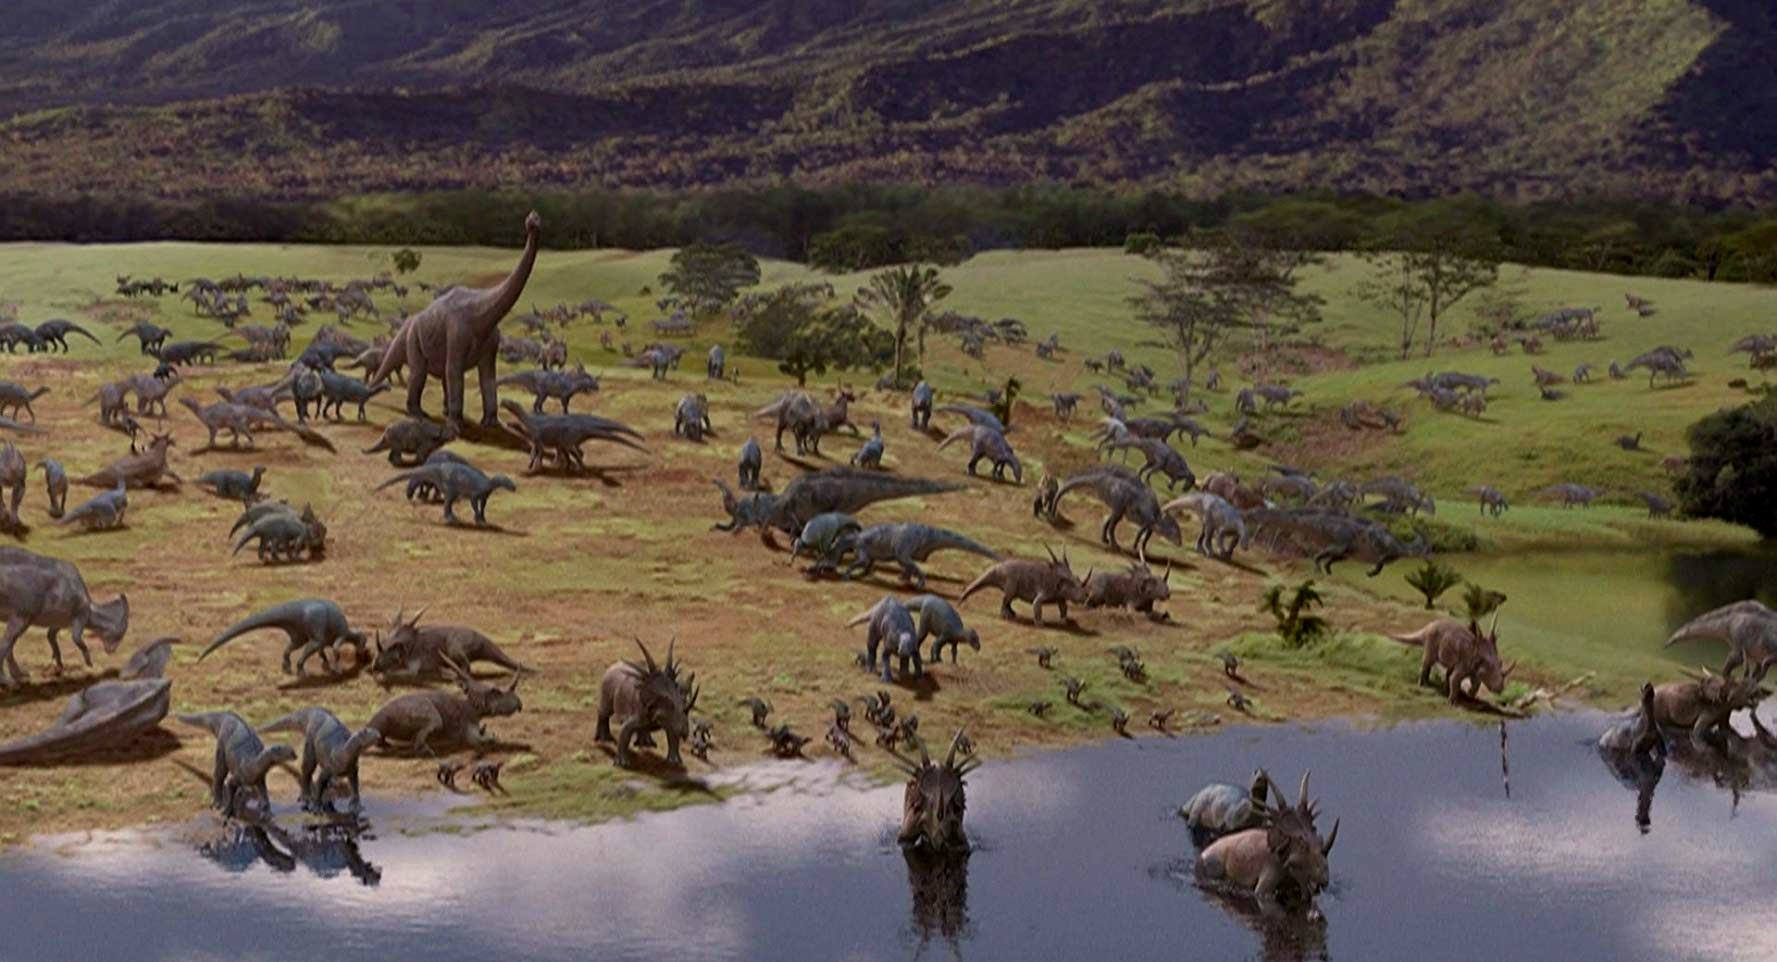 The dinosaurs on a trek to a new home in Dinosaur (2000)